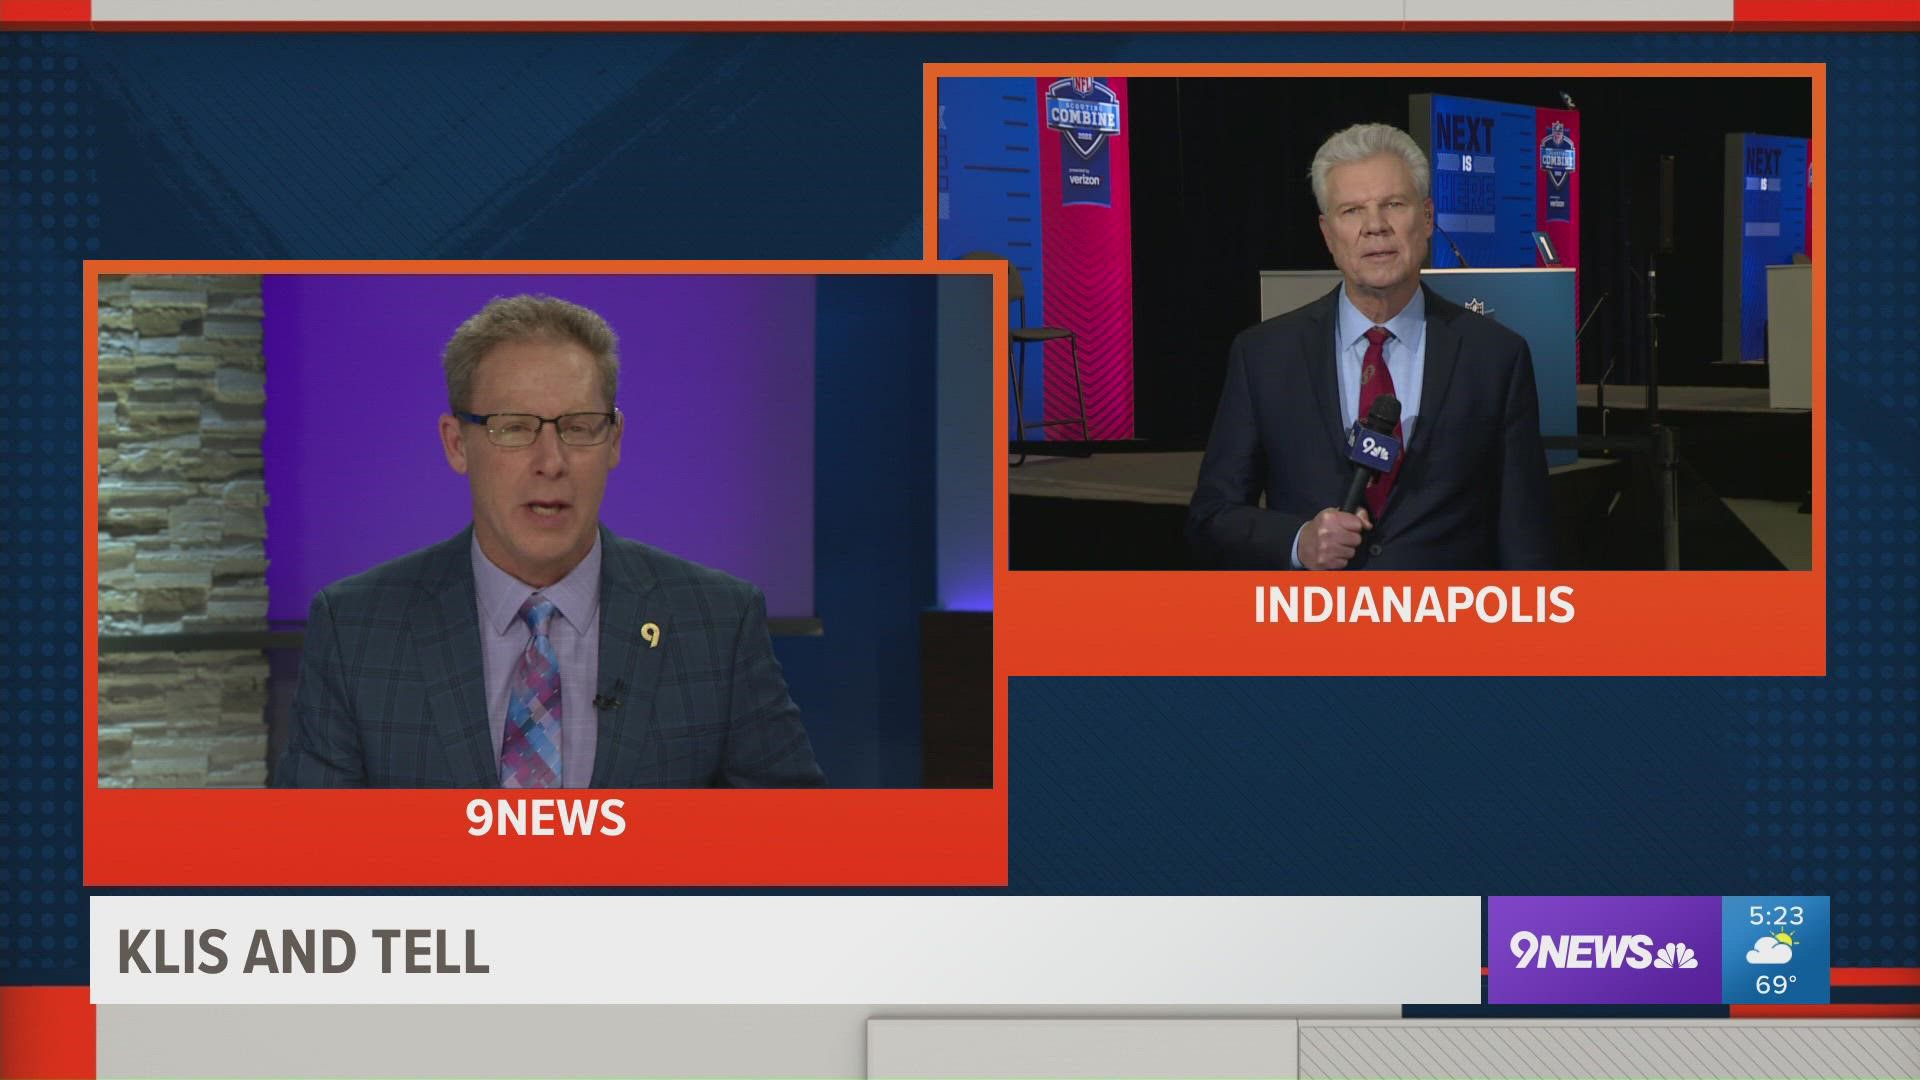 Mike Klis reports from the 2022 NFL Combine live on 9NEWS with Rod Mackey on Tuesday, March 1, 2022.